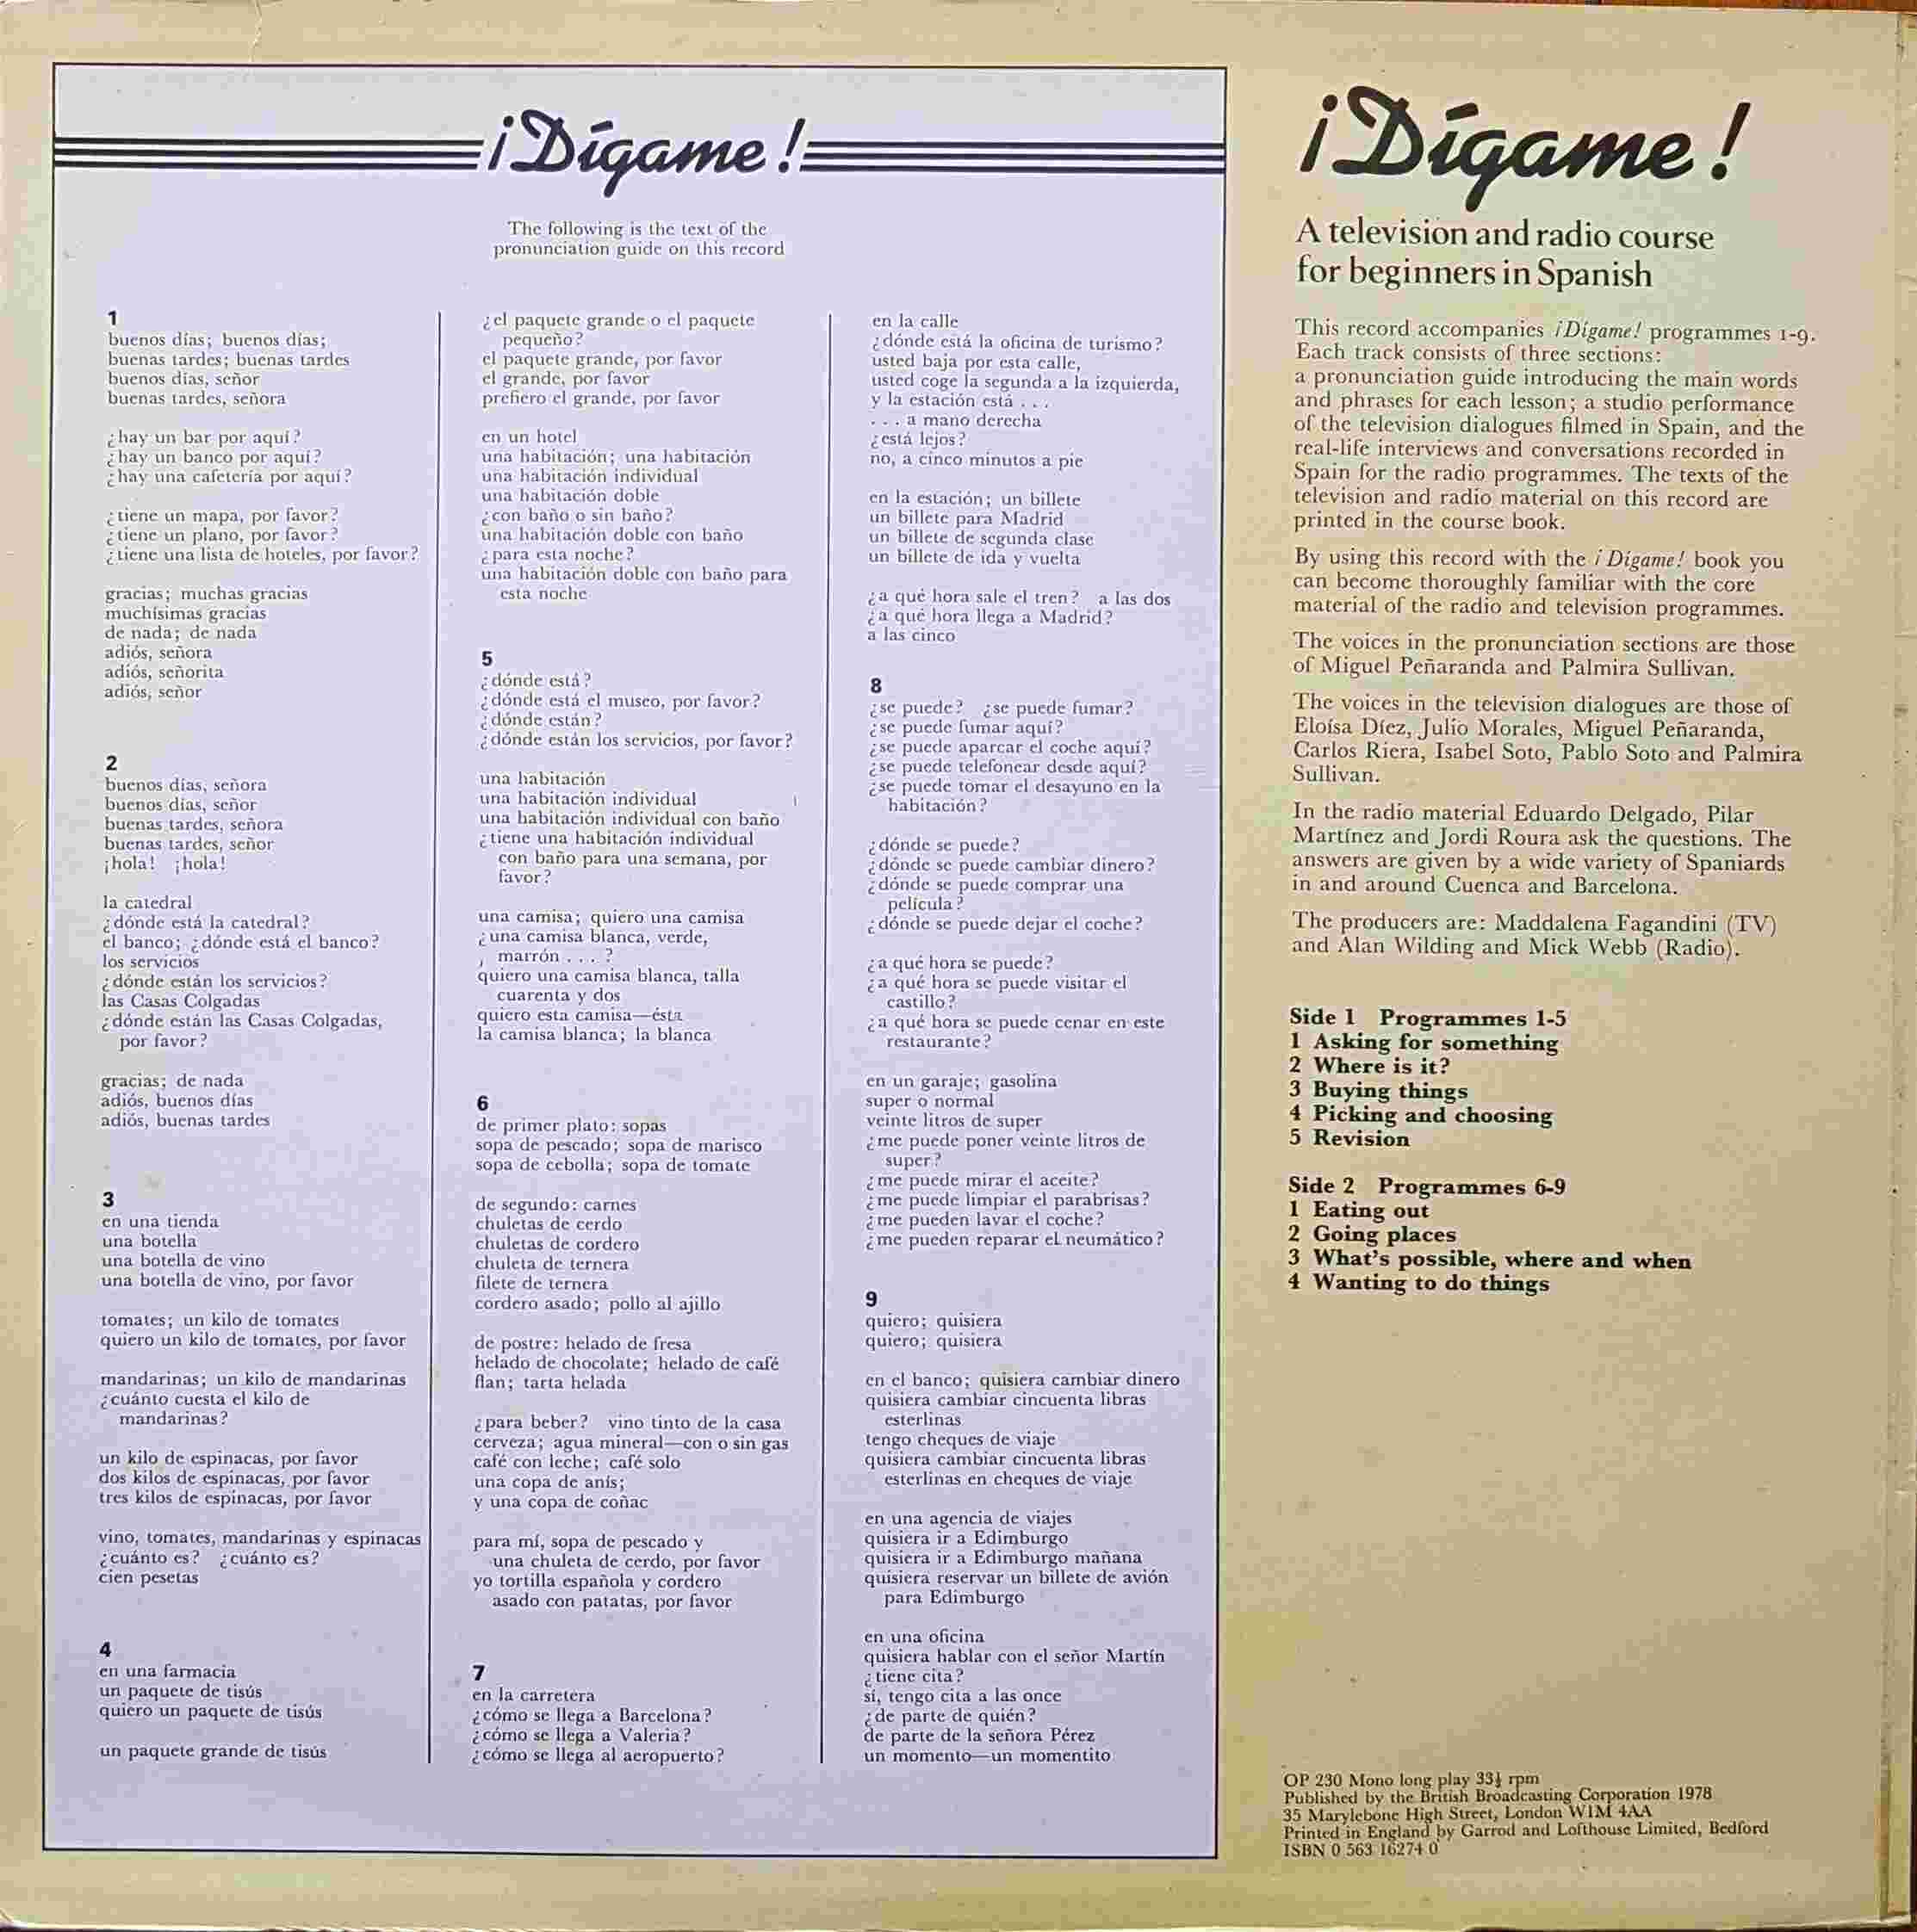 Picture of OP 230 Digame ! 1 - A television and radio course for beginners in Spanish - Programmes 1 - 9 by artist Various from the BBC records and Tapes library